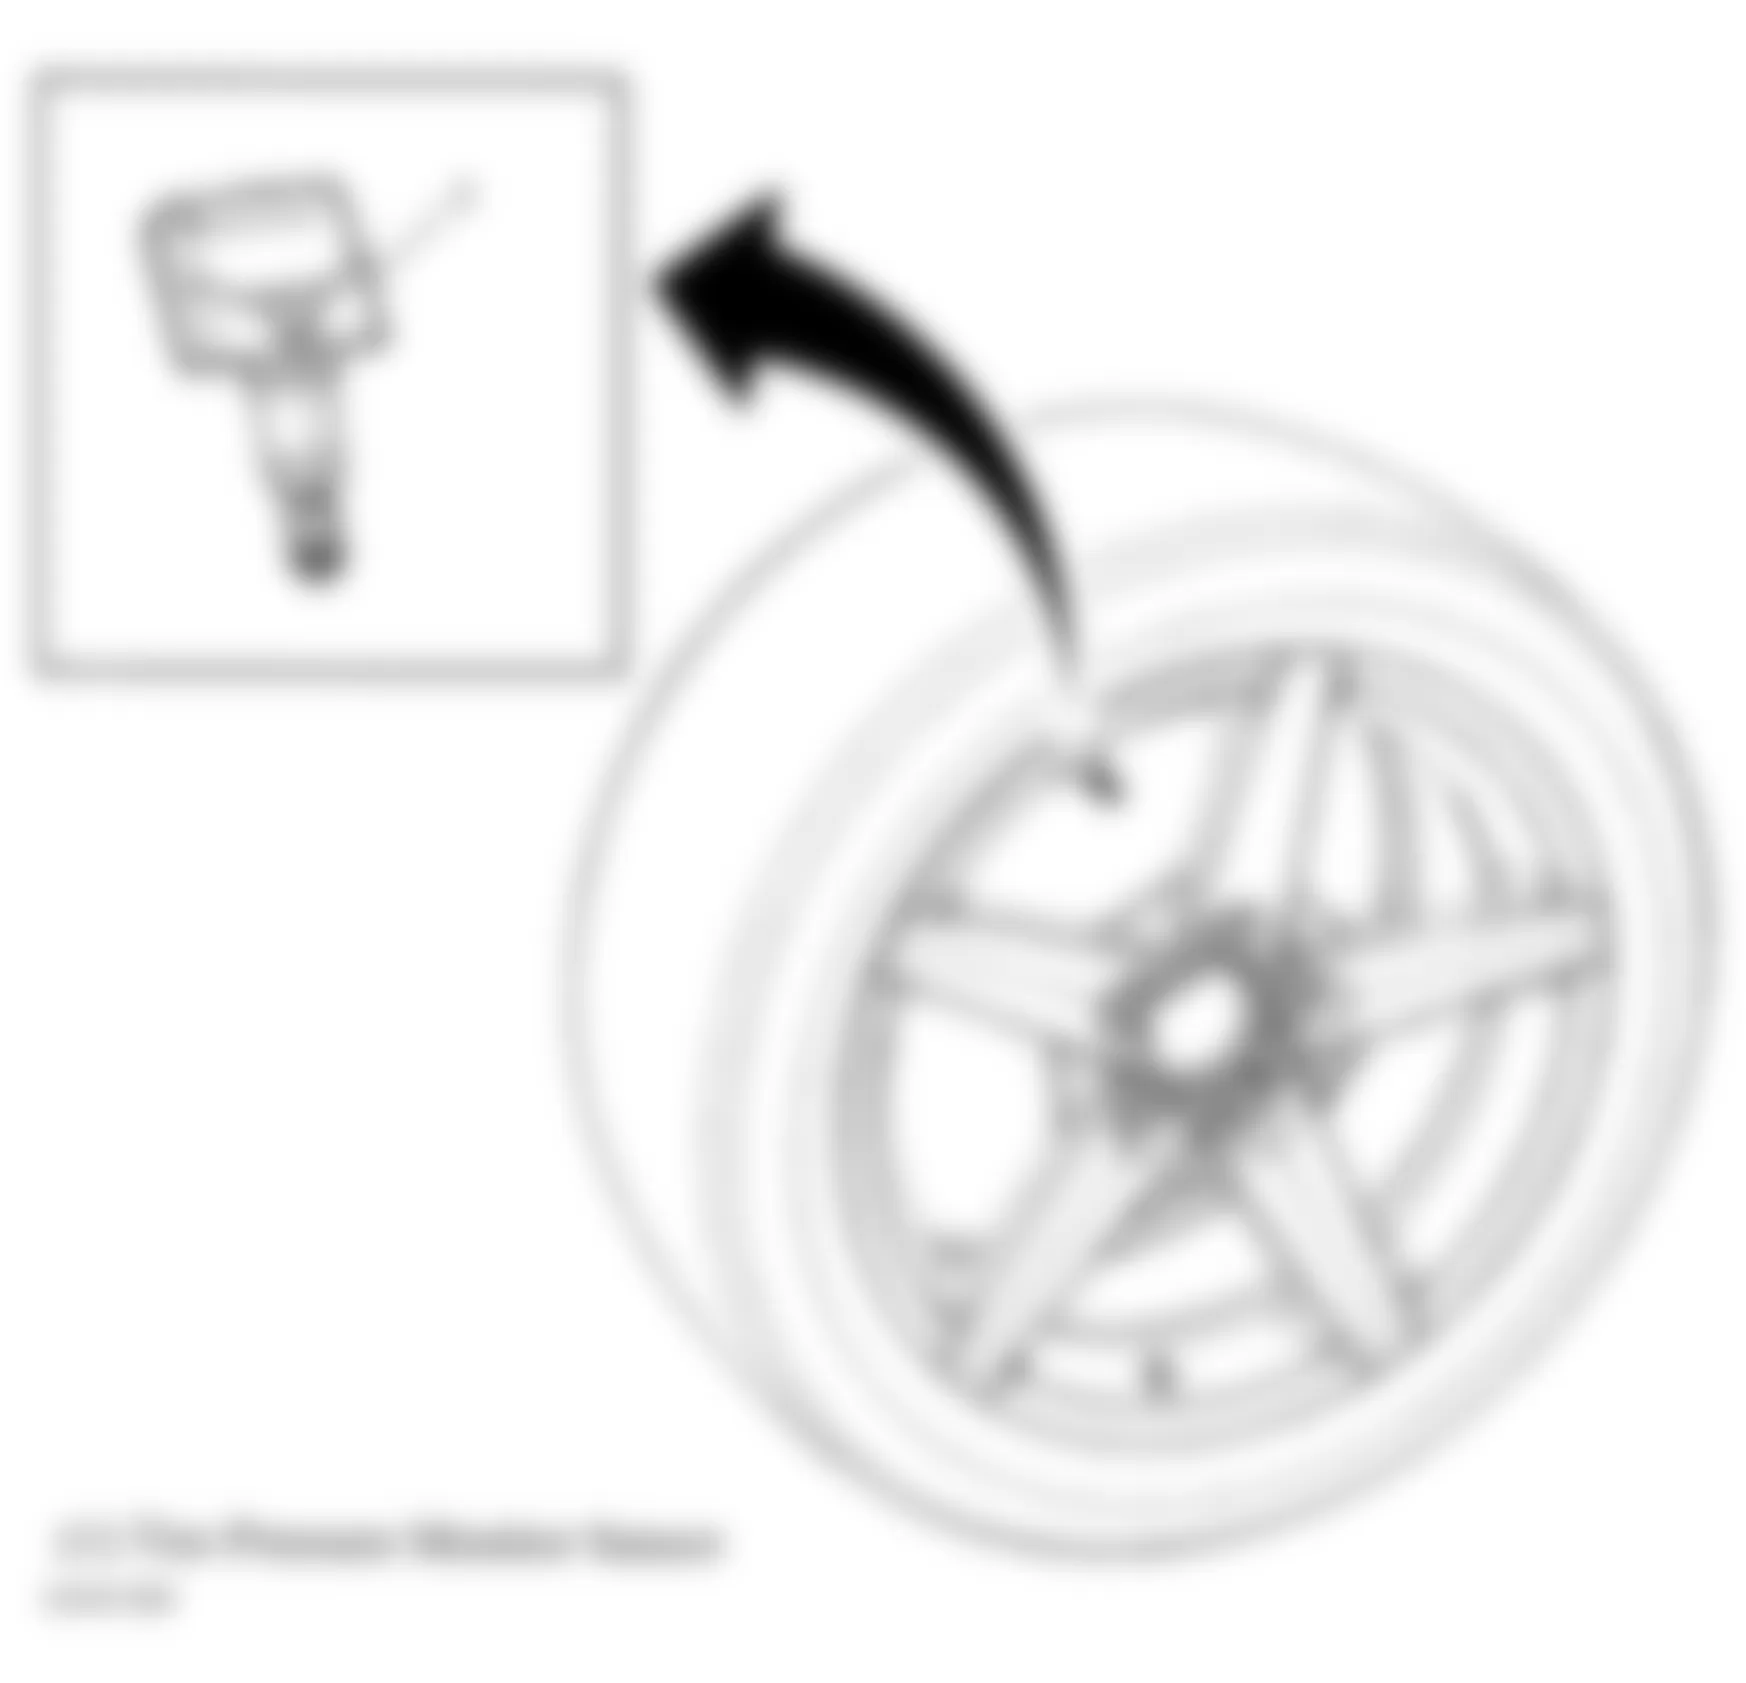 Chevrolet Monte Carlo LTZ 2006 - Component Locations -  Wheel Assembly